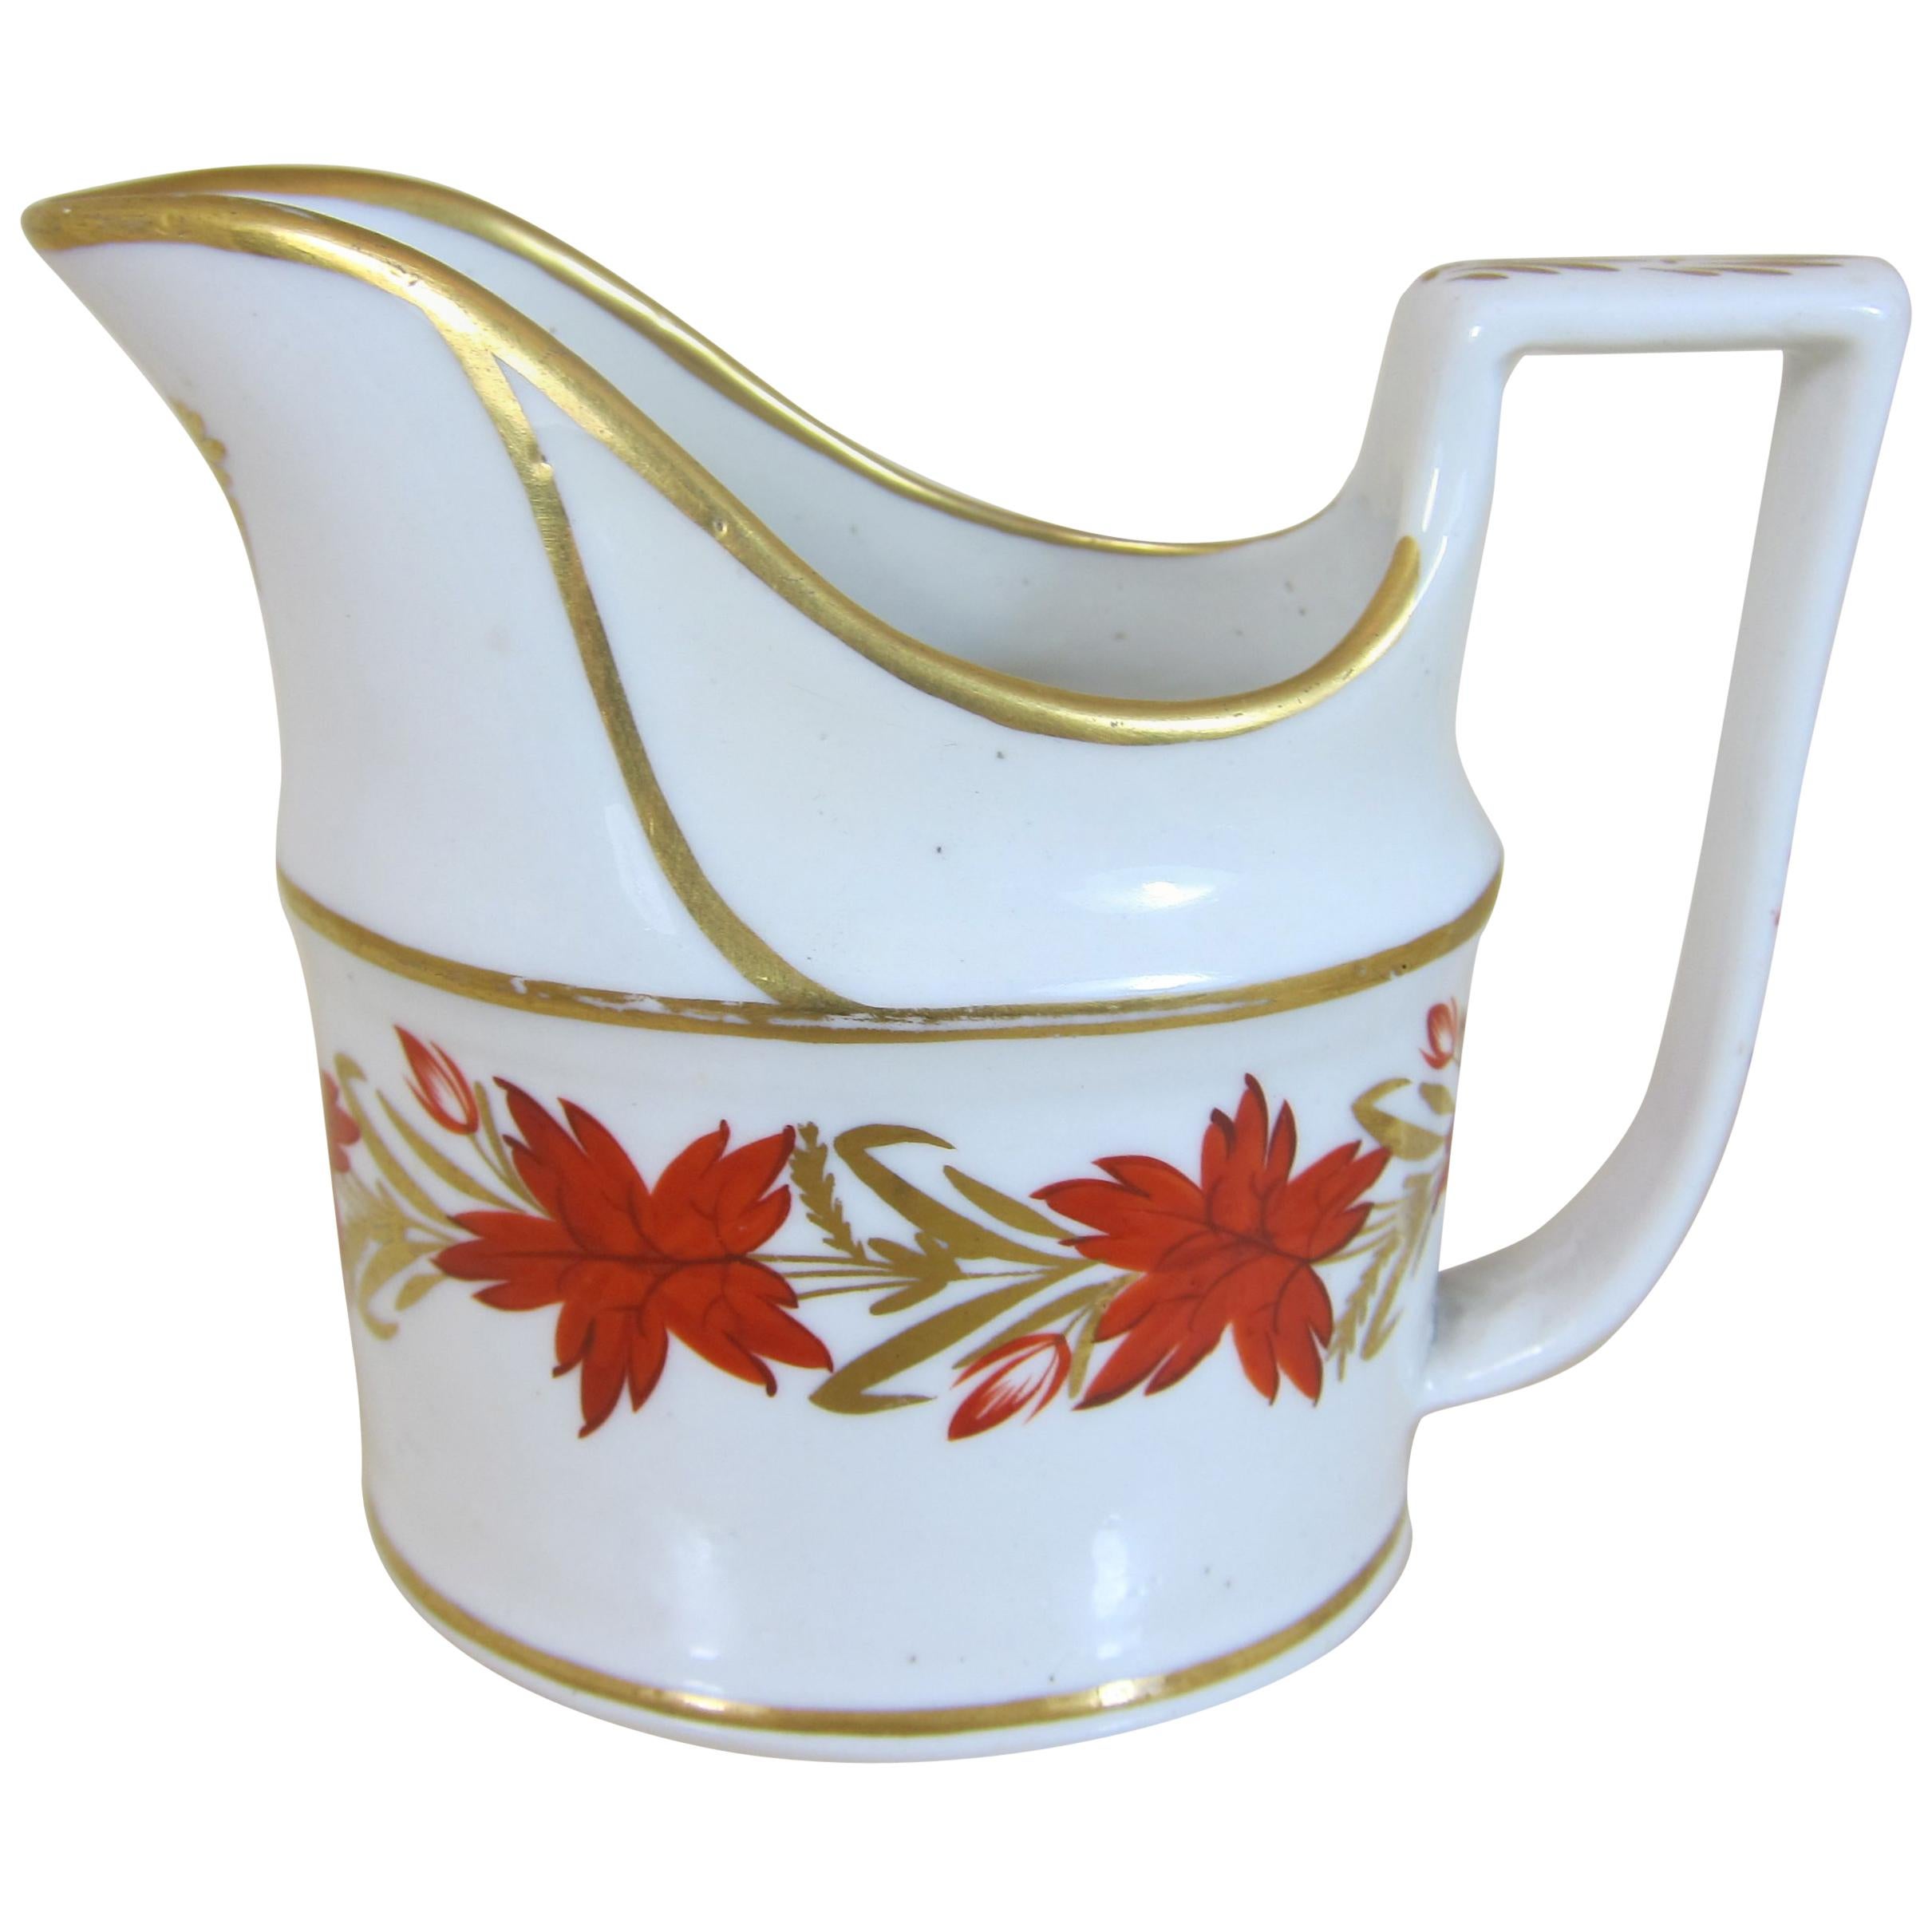 Coalport Porcelain Creamer Decorated with Red and Gilt Flowers